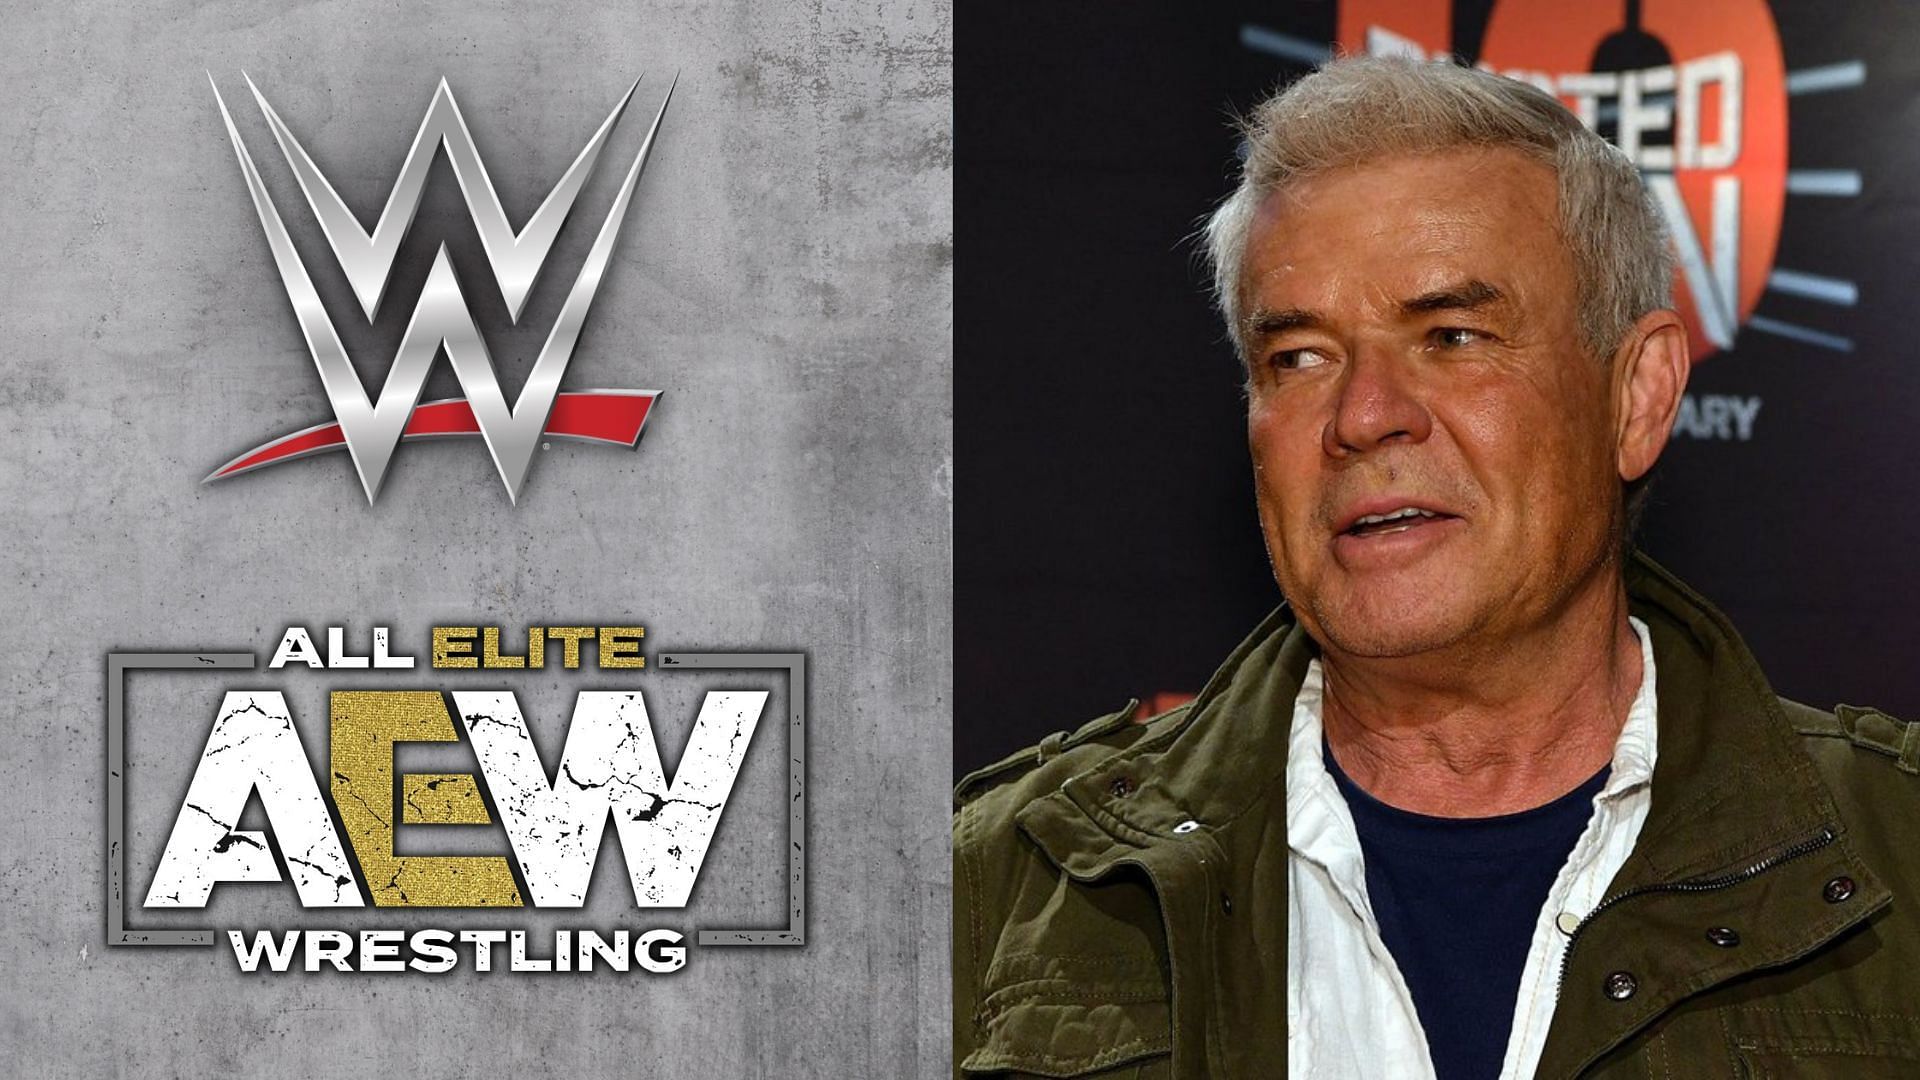 AEW and WWE logos (left), Eric Bischoff (right)